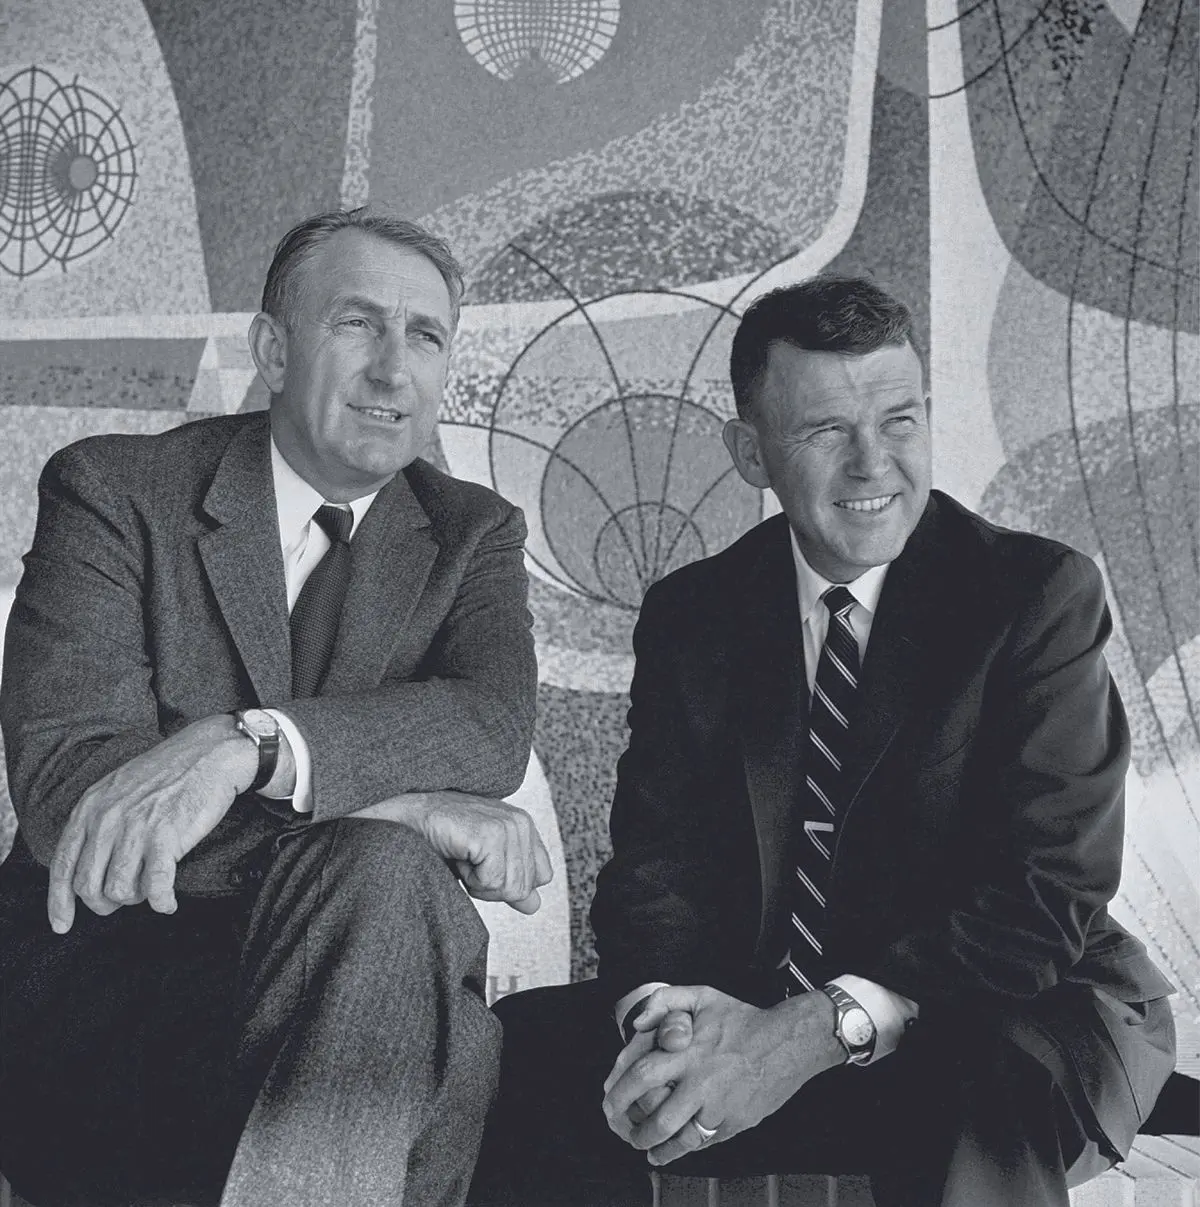 William hewlett and david packard: founders of hp